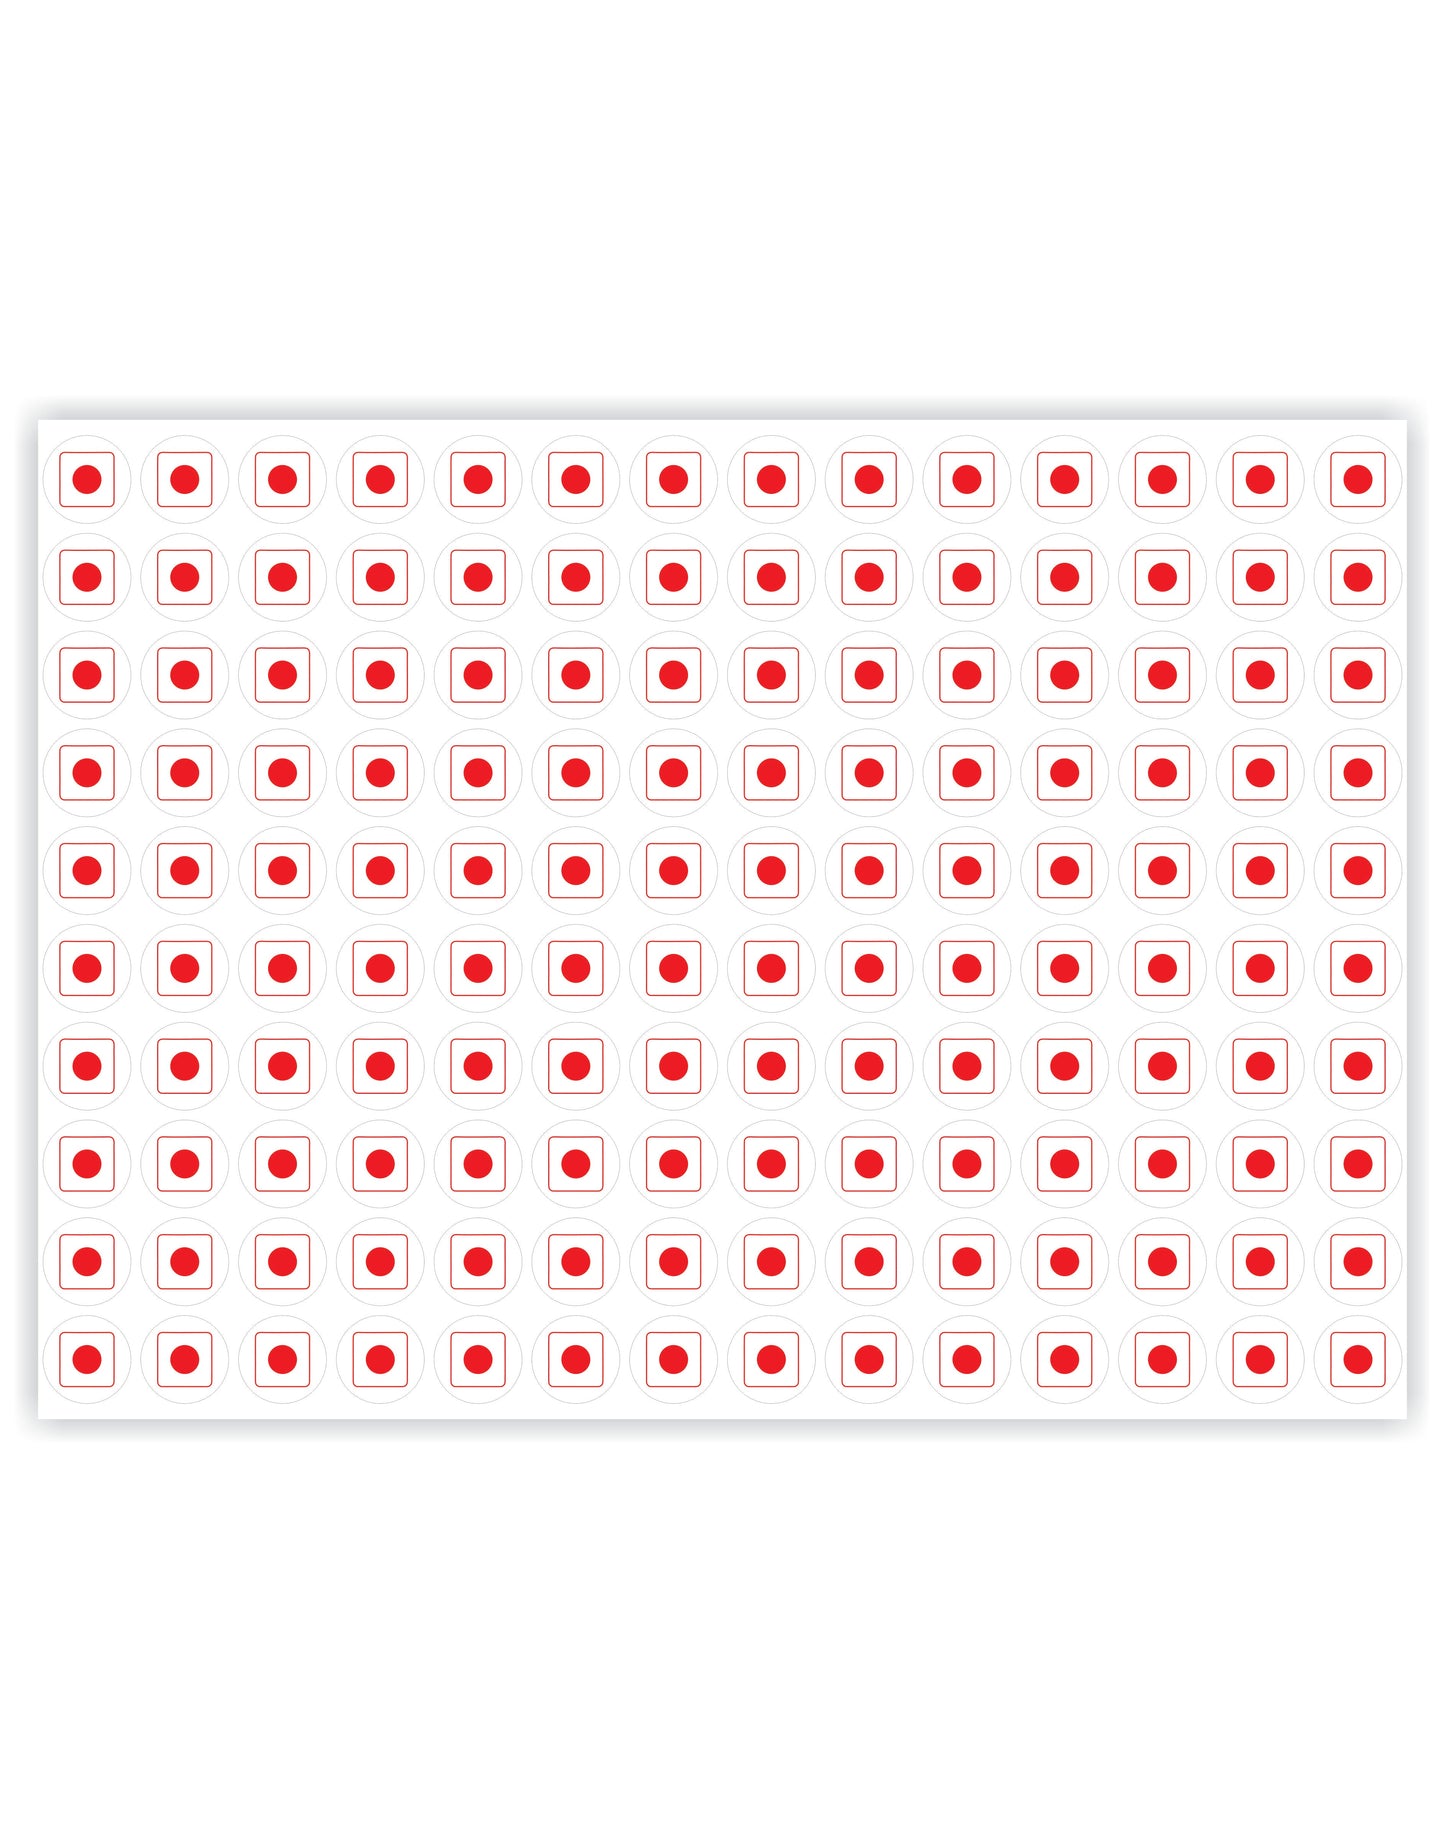 iberry's Self Adhensive 540 Non Veg Stickers Red for Food Packaging|Size 9 mm Dia| Food Label Stickers